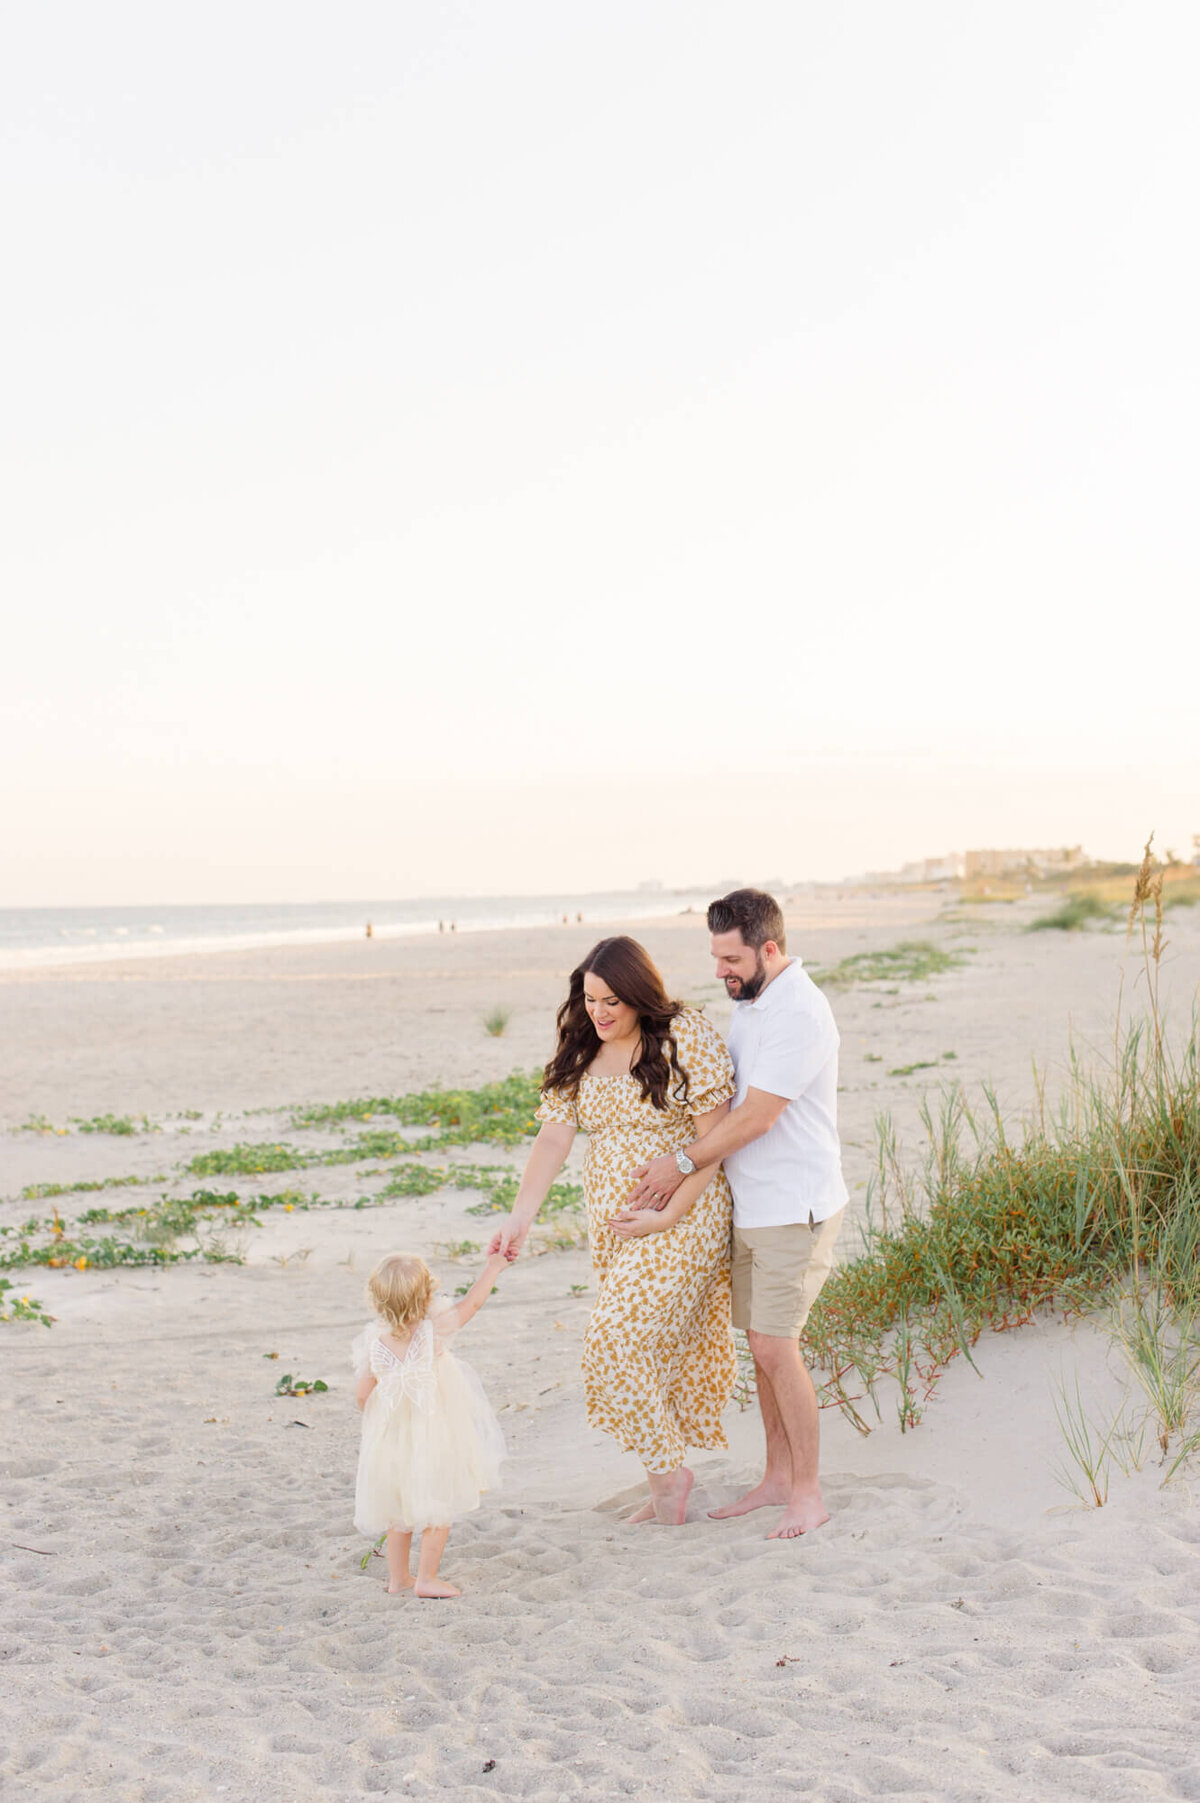 New parents stand on the beach near the dunes watching their young daughter hand them shells at the end of their Orlando maternity photographer session